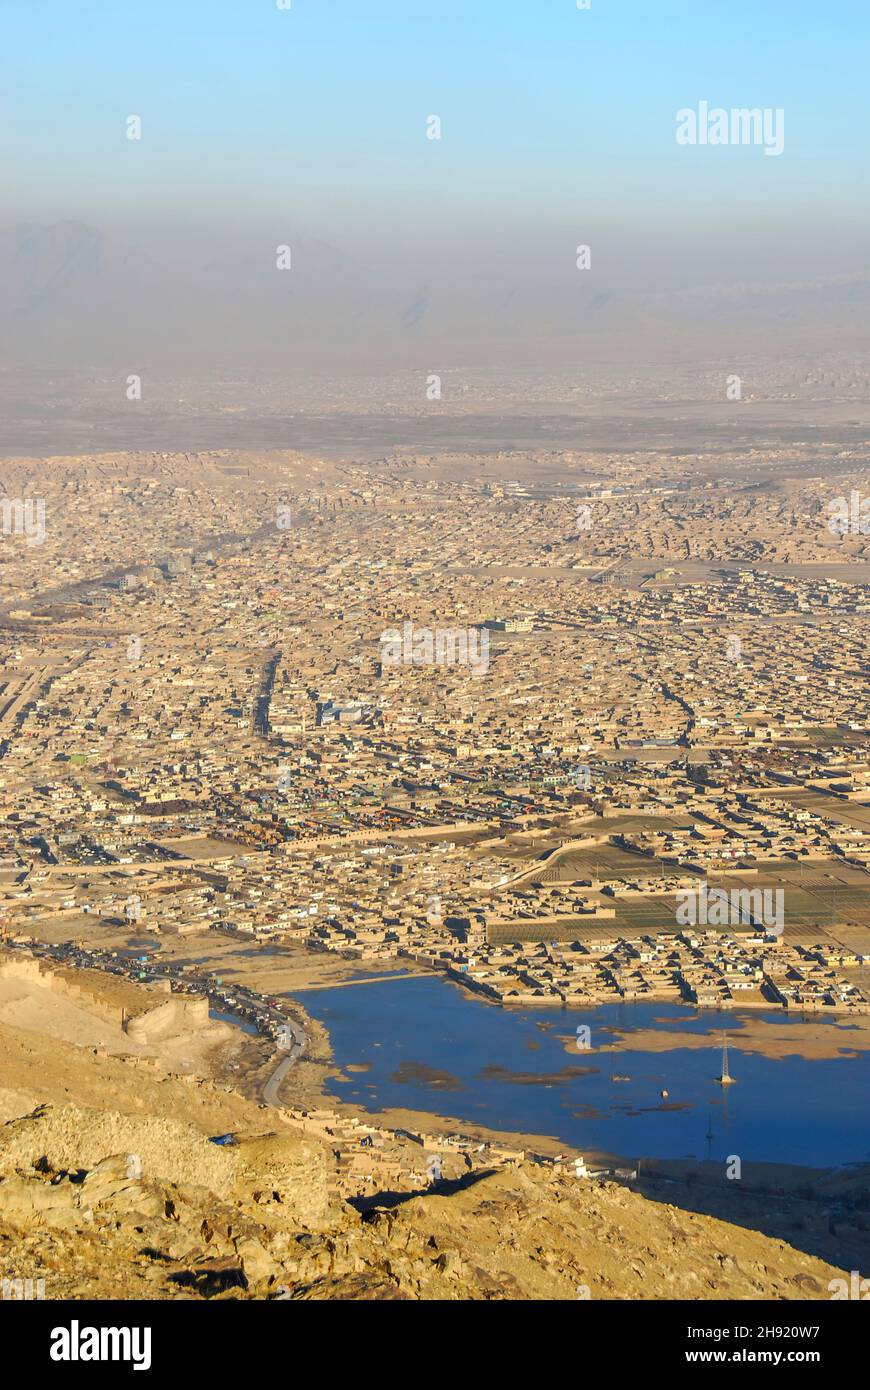 A view of the lake inside the boundaries of Kabul city surrounded by the hillsides with its informal settlements and mountain ranges with pollution in Stock Photo